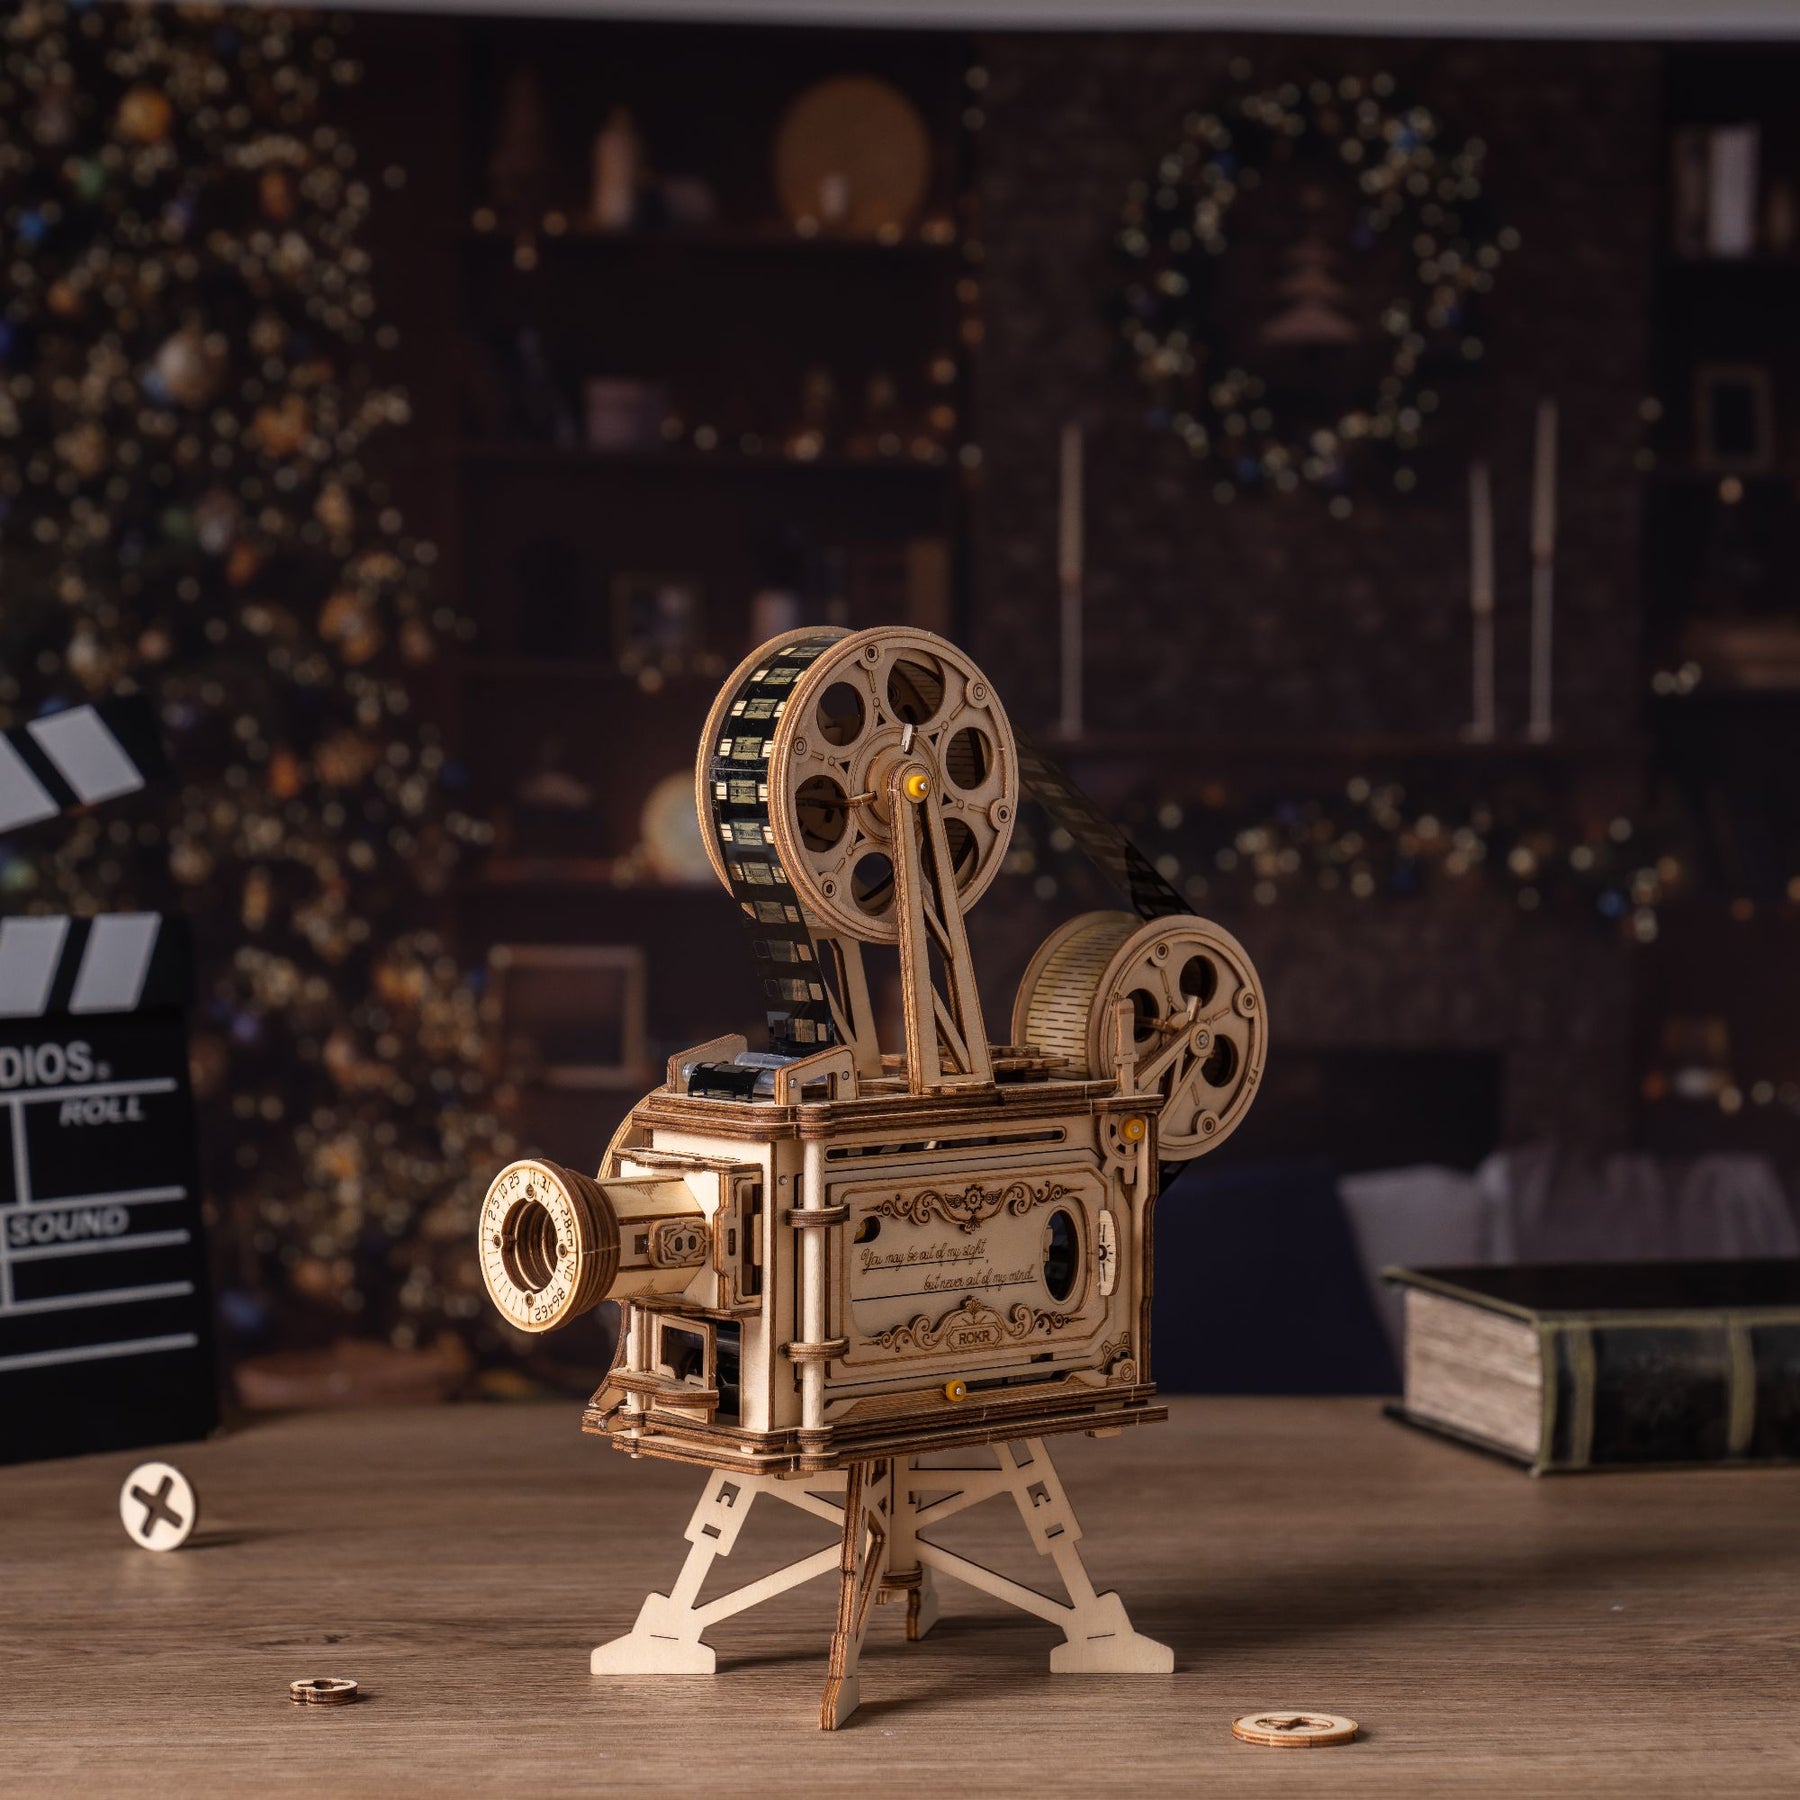 ROKR Vitascope Movie Projector 3D Wooden Puzzle